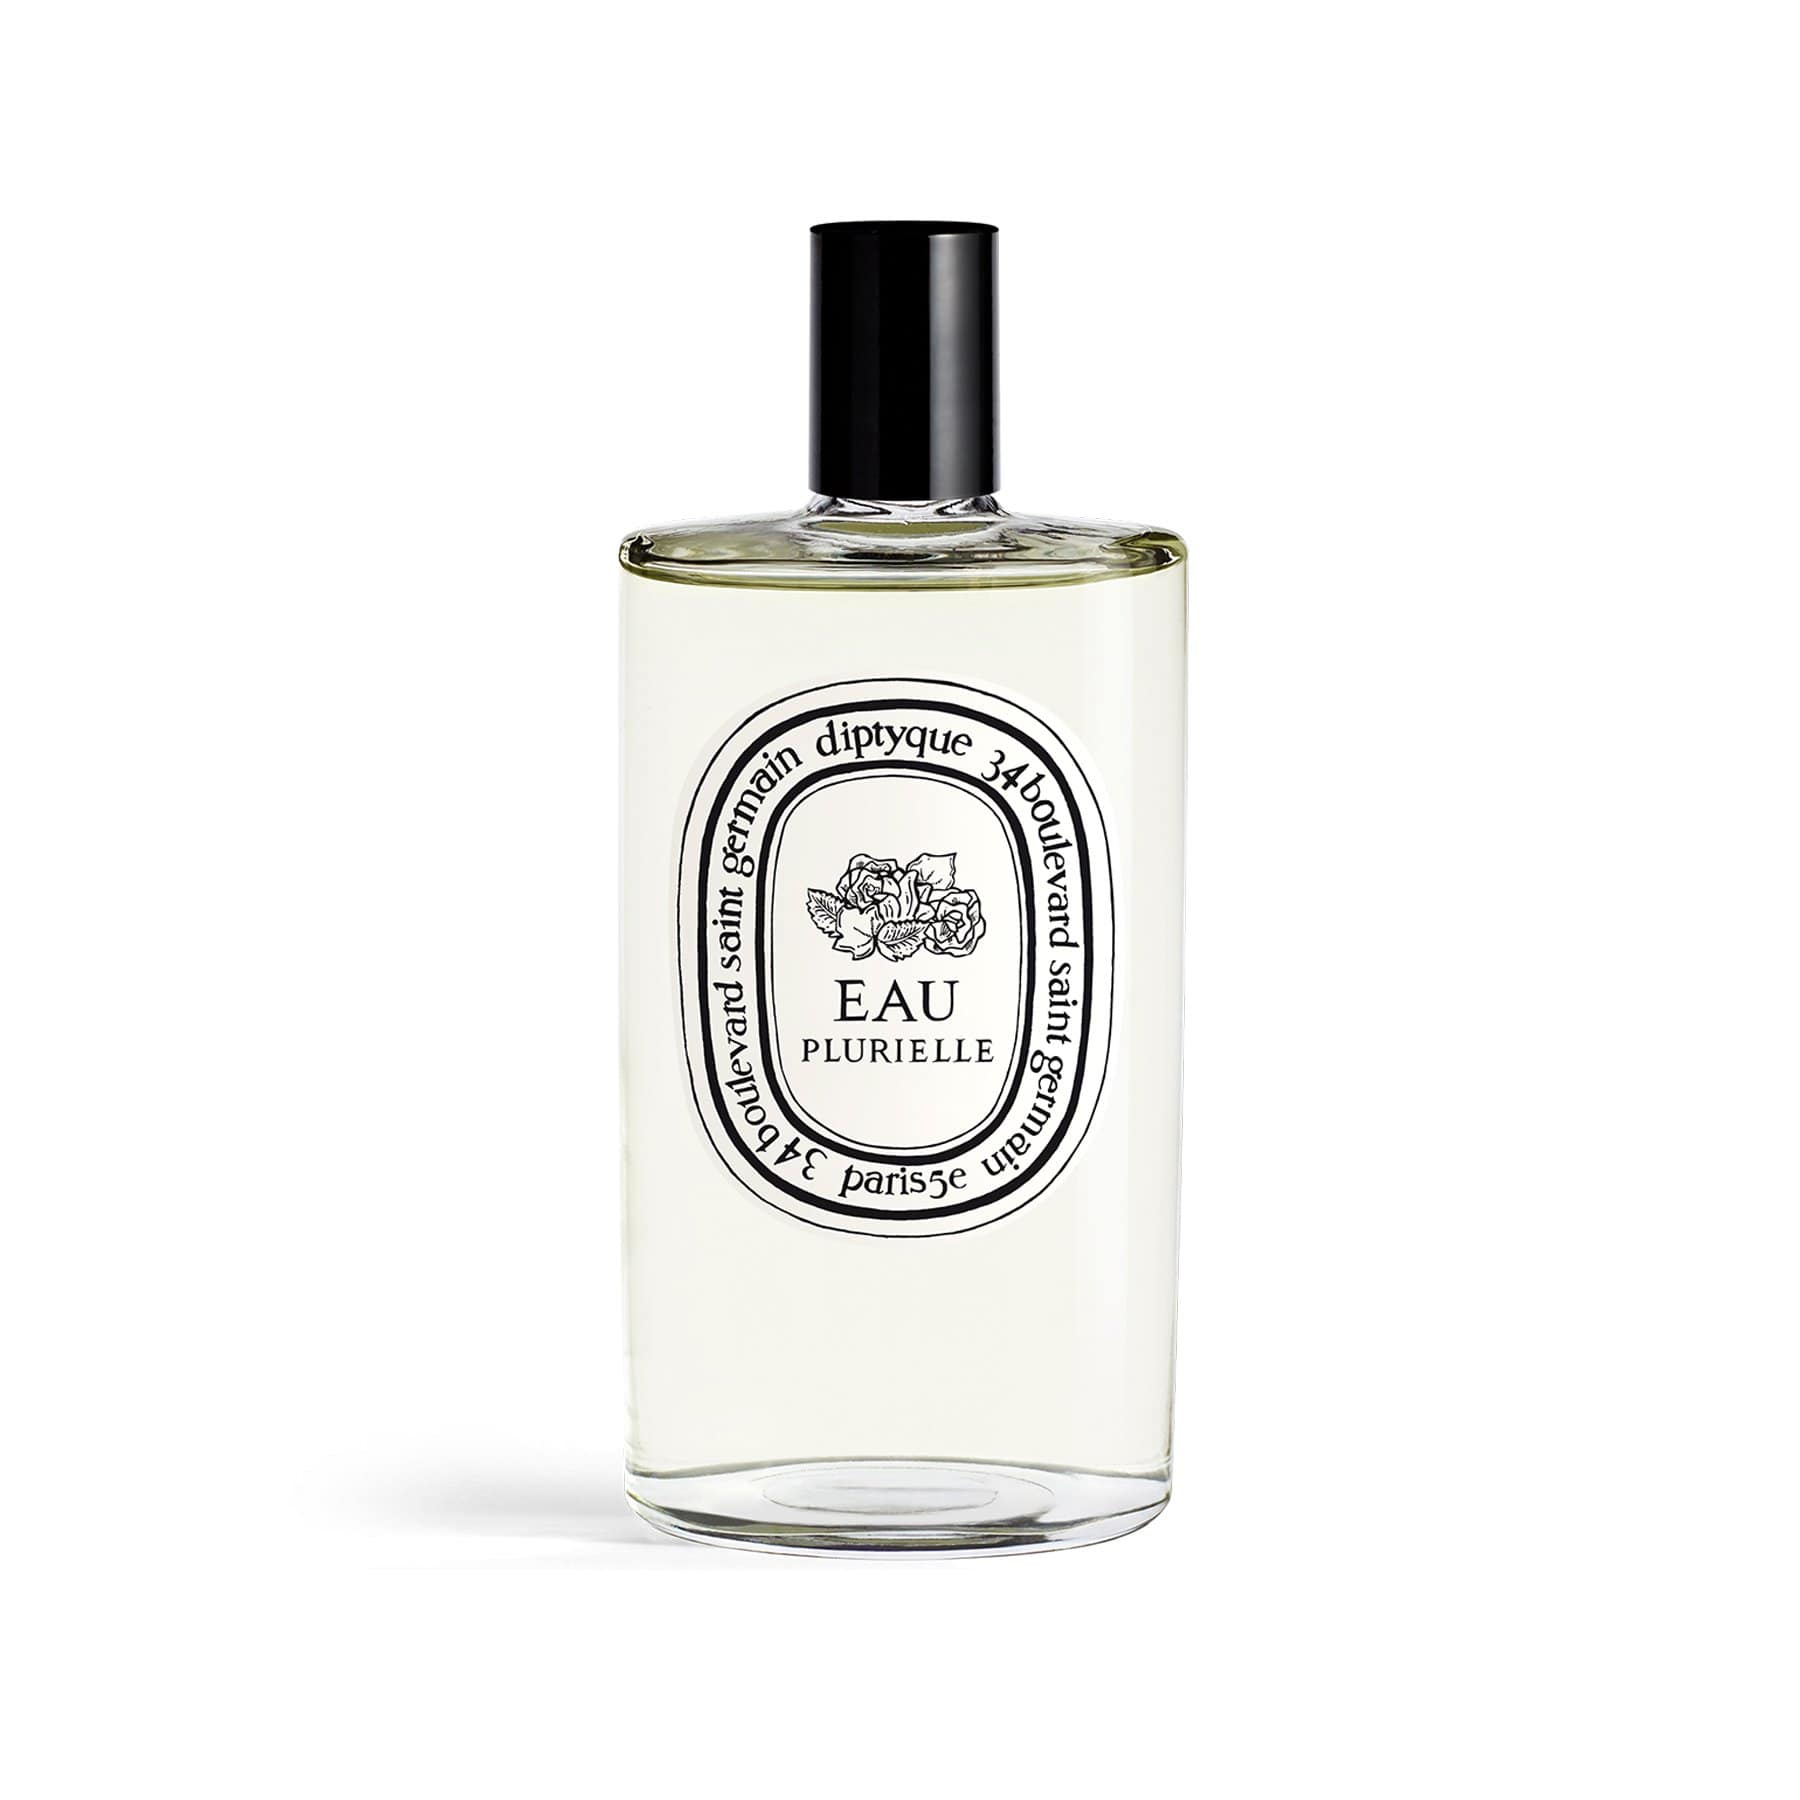 Eau Plurielle Diptyque Multipurpose perfume for skin and textiles